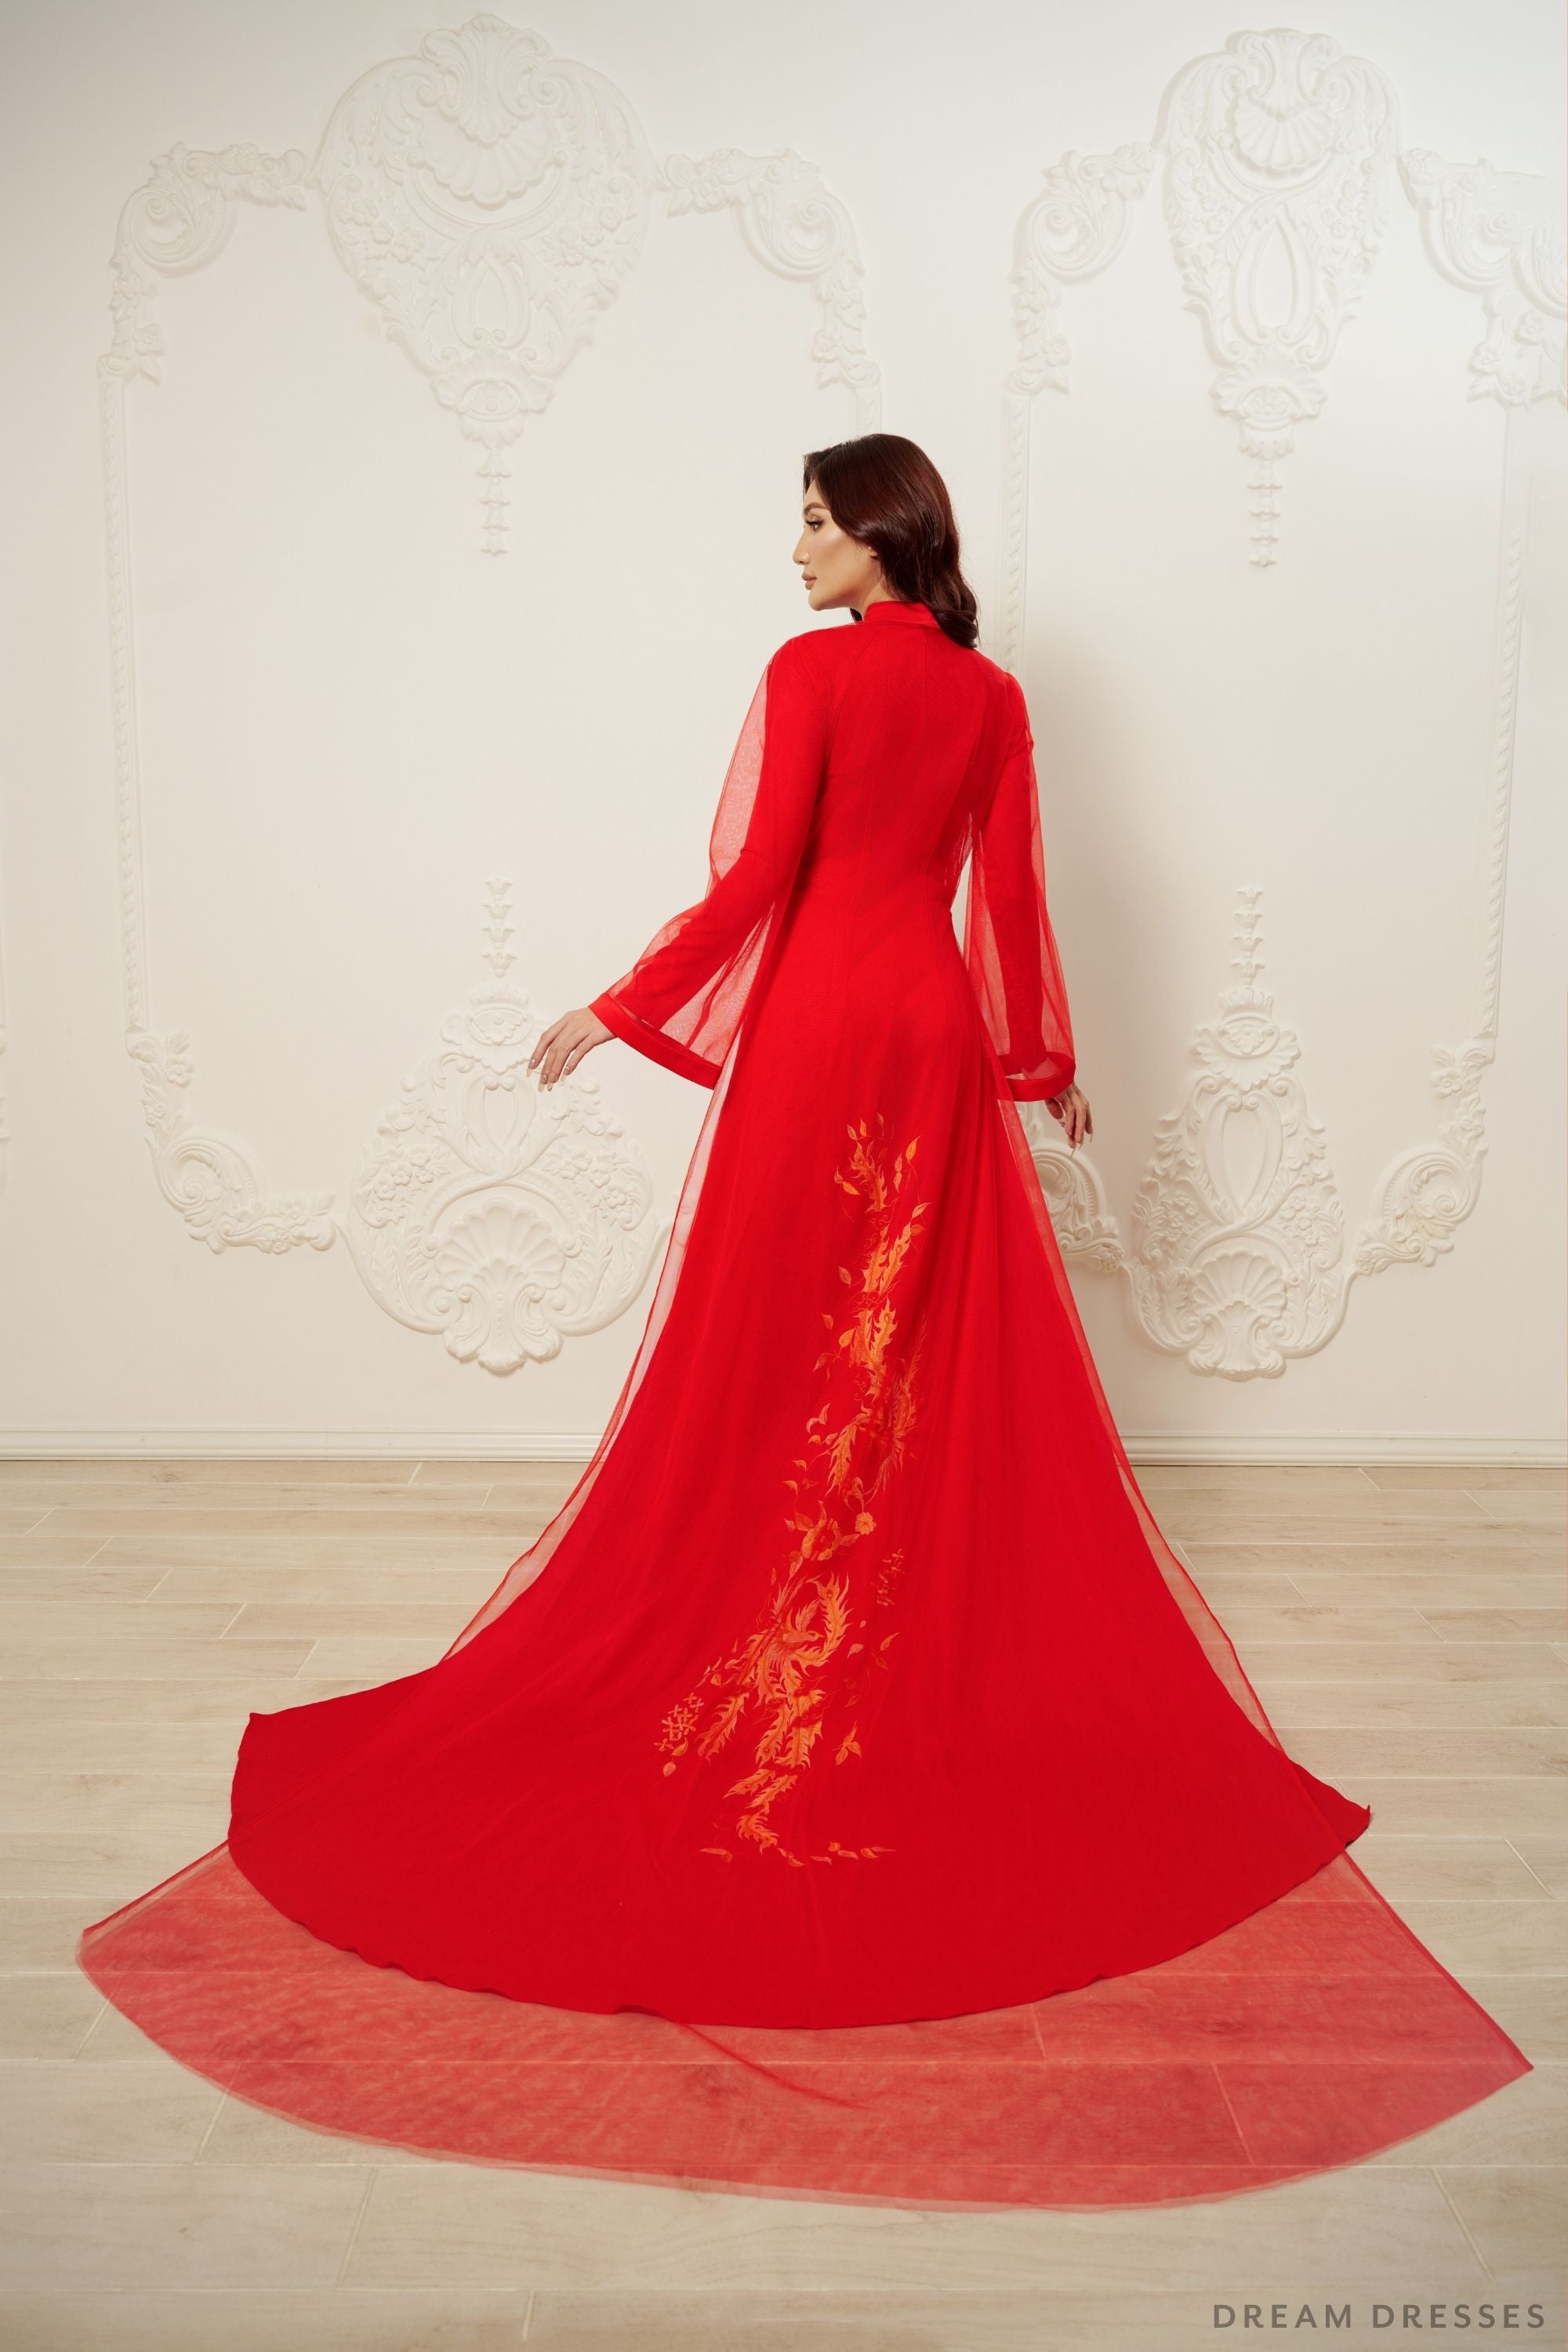 Red and Gold Ao Dai OverCoat | Traditional Vietnamese Bridal OverCoat  (#MYPHUONG)